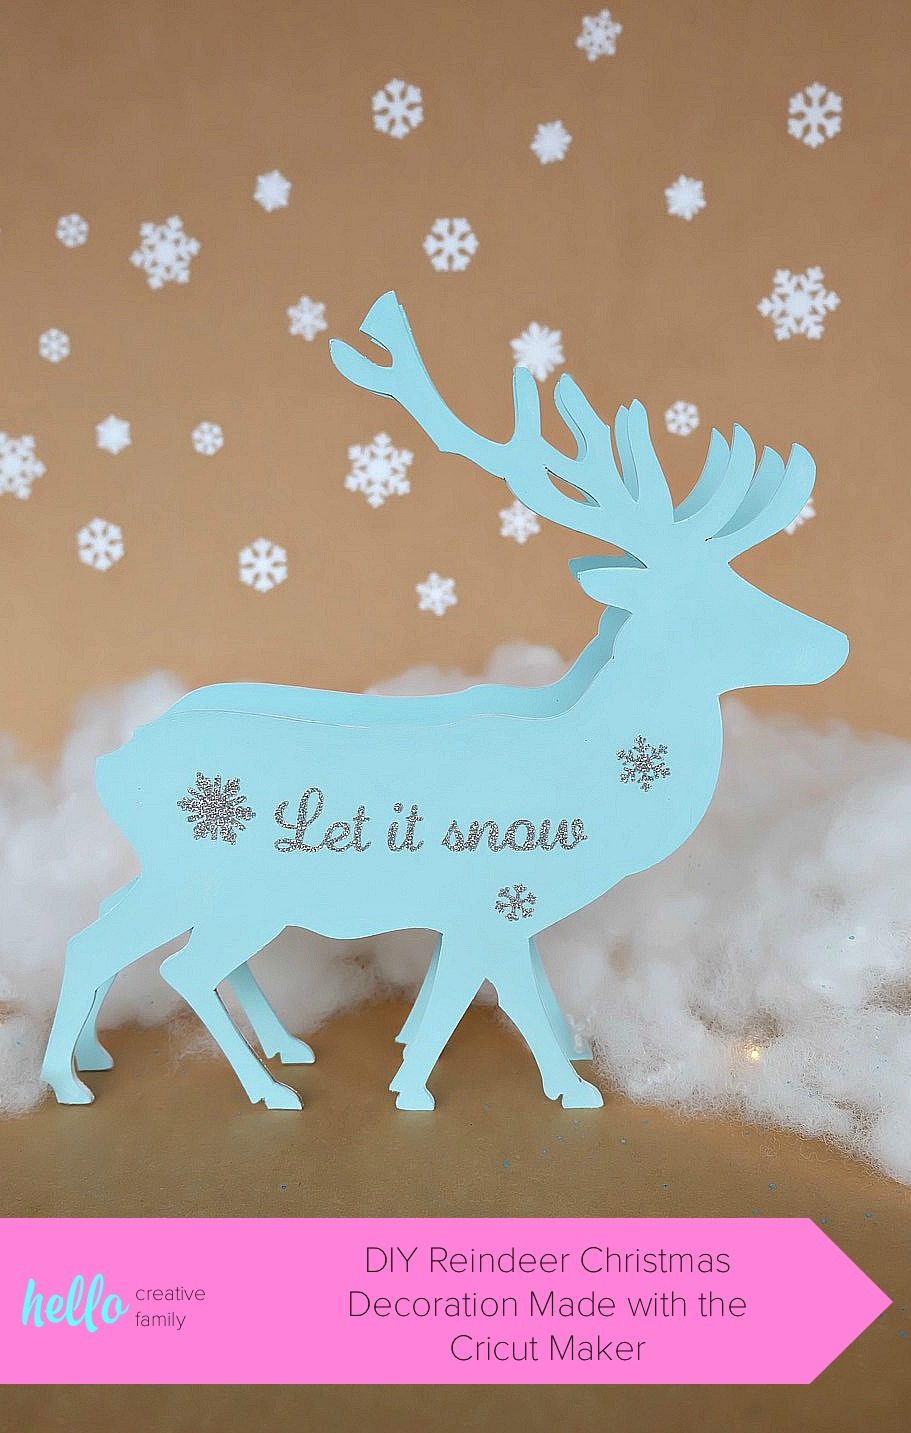 This beautiful DIY reindeer Christmas Ornament is cut using the Cricut Maker! Decorated with "Let It Snow" it makes a beautiful handmade gift idea! This step by step tutorial with photos teaches you how to cut chipboard using your Cricut Maker to make beautiful home decor items. Make handmade reindeer decorations as teacher gifts, gifts for mom, or gifts for a friend. #HandmadeGift #CricutMaker #Christmas #Reindeer #Sponsored